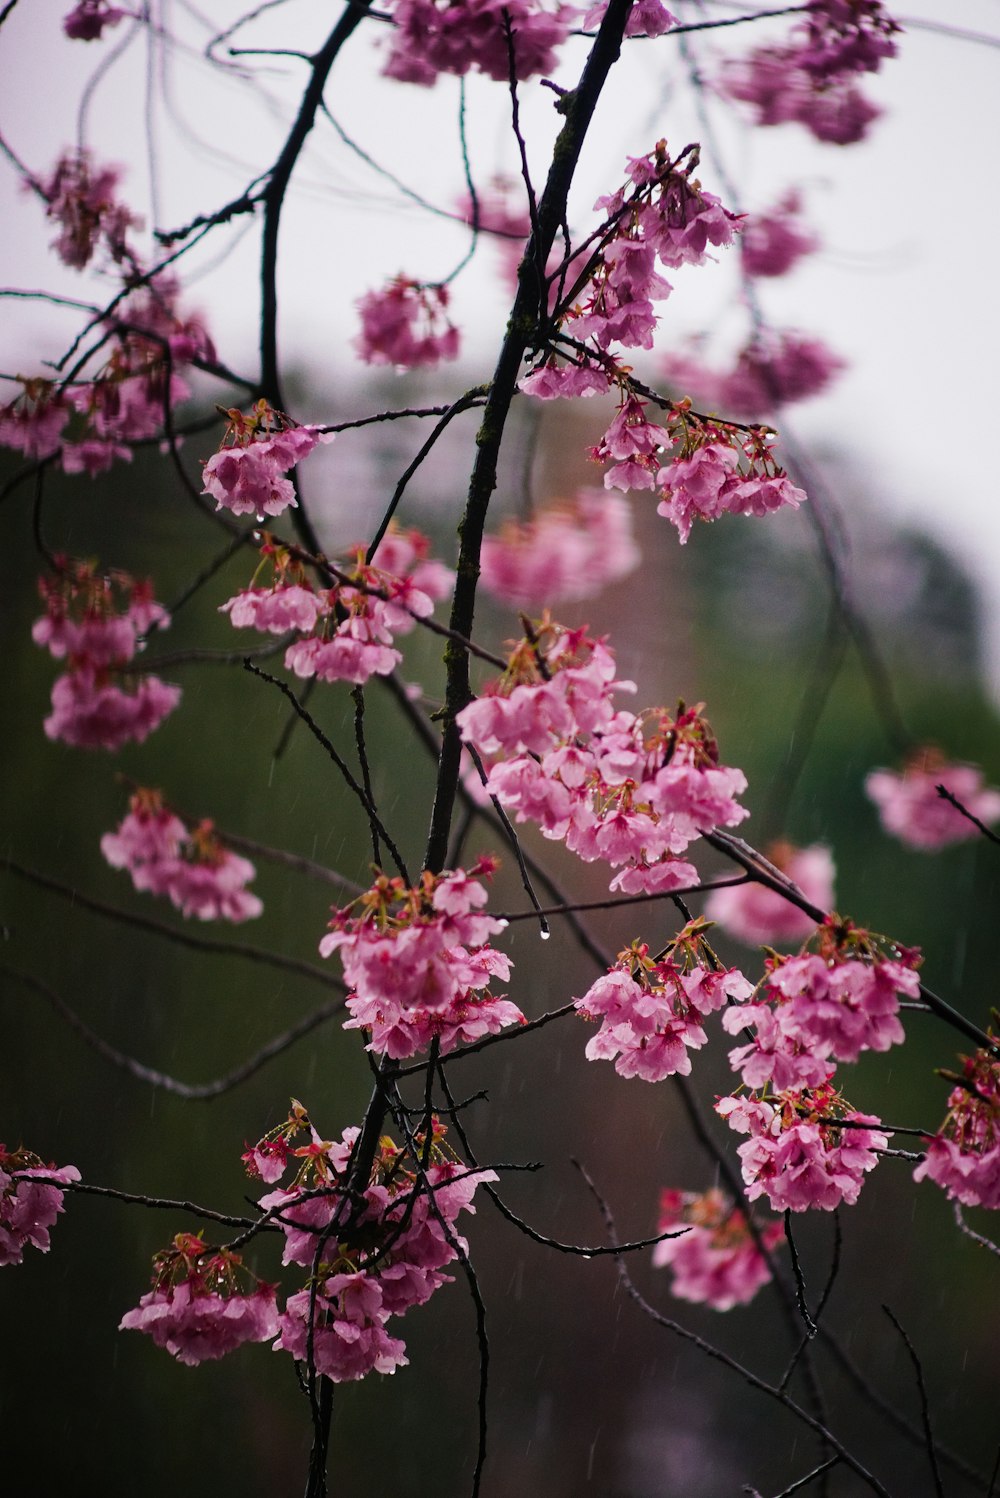 pink flowers are blooming on a tree branch